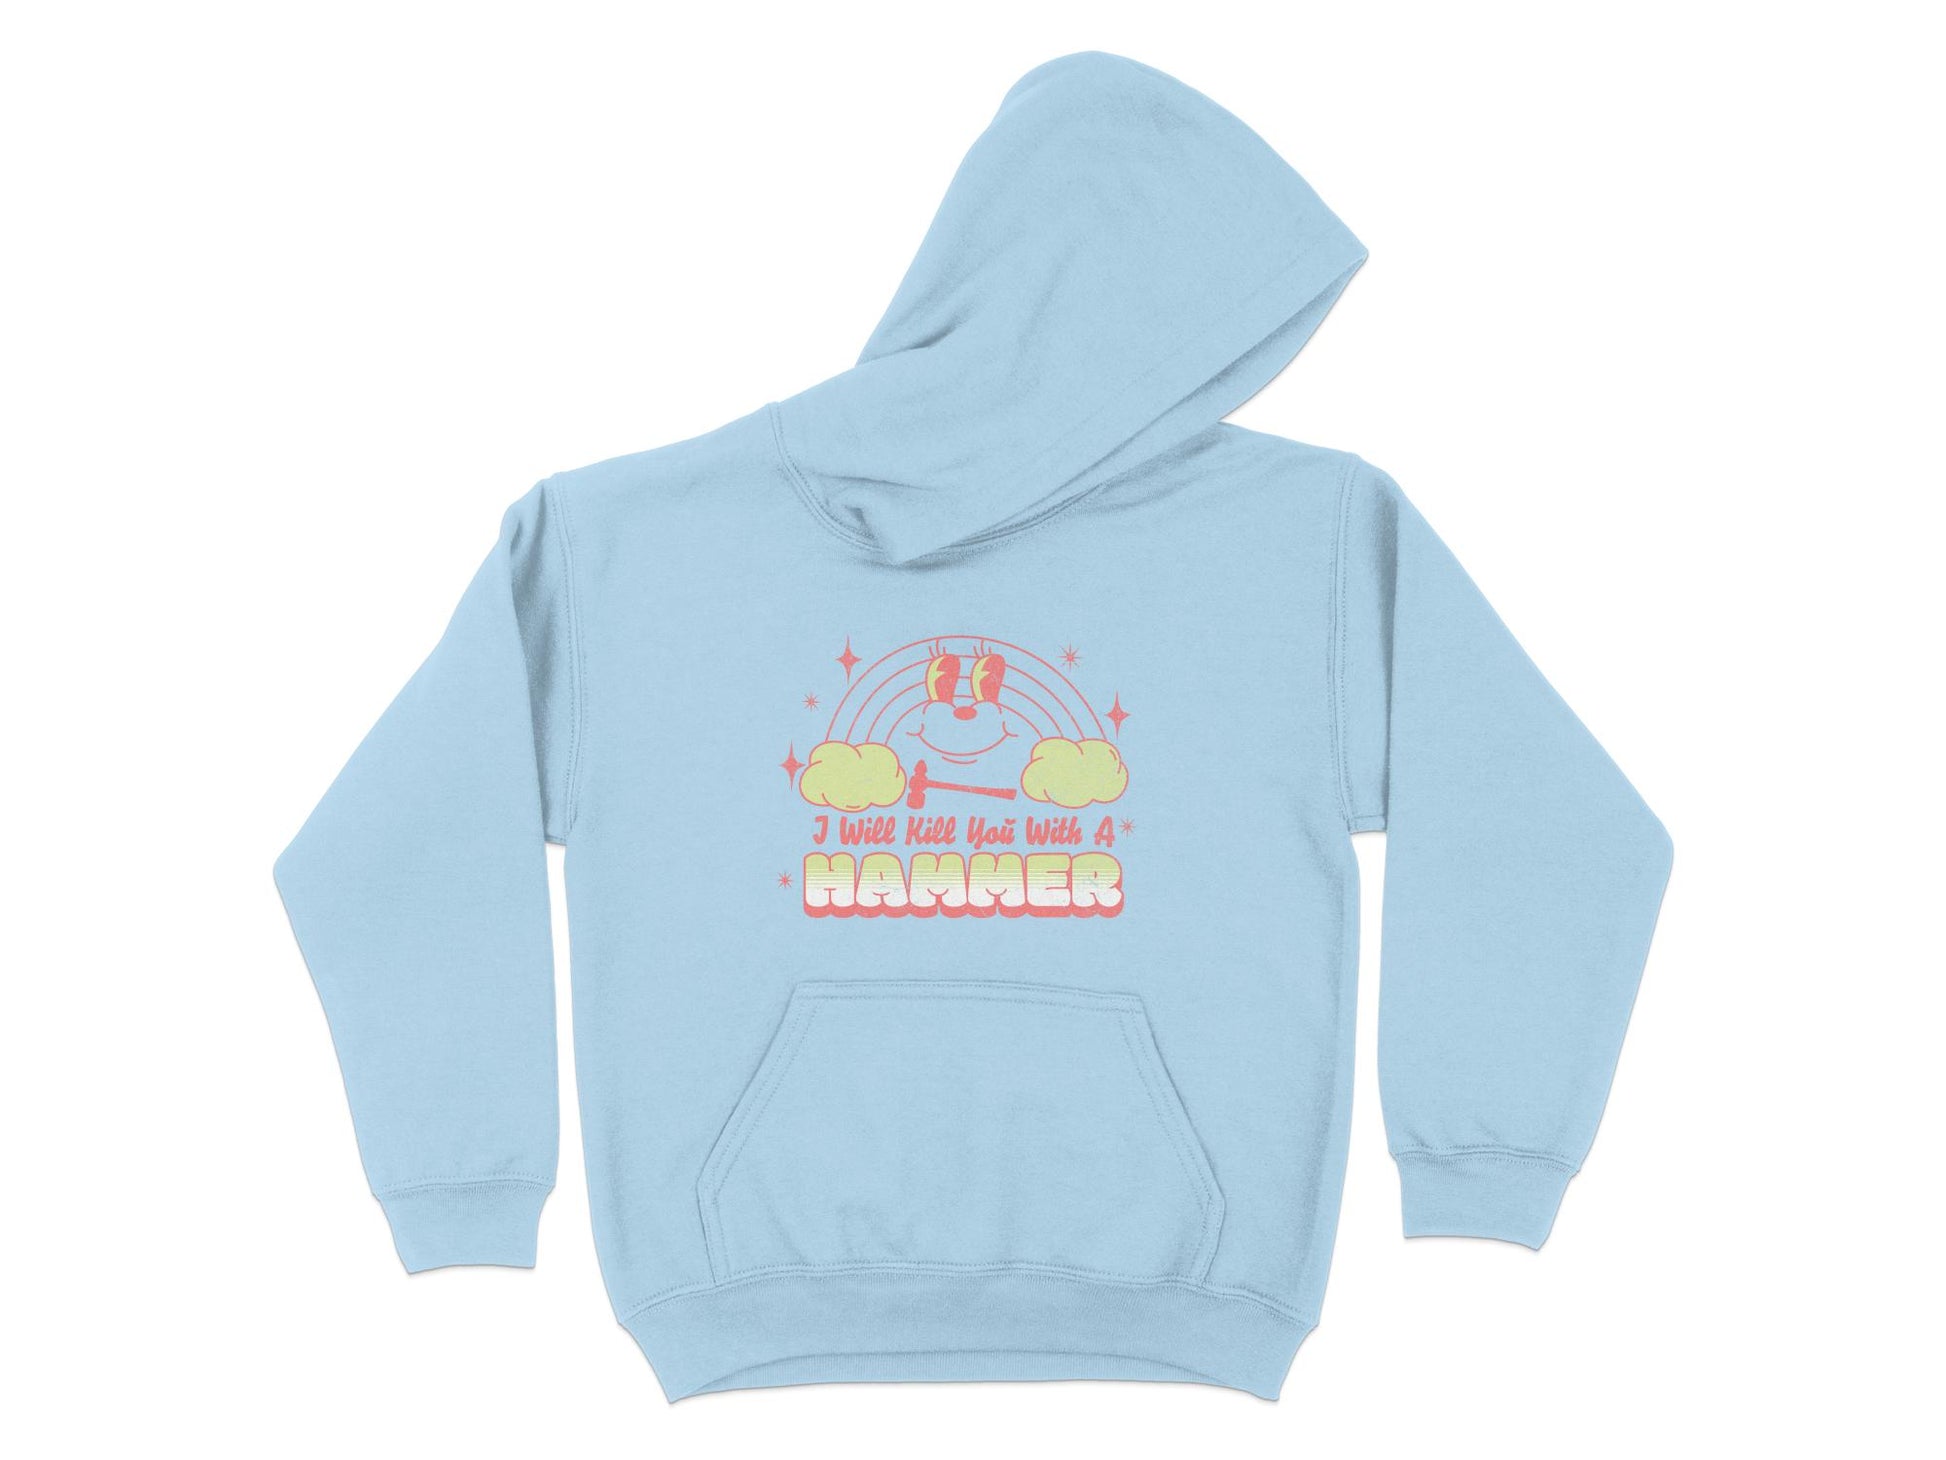 I Will Kill You With a Hammer Hoodie, light blue